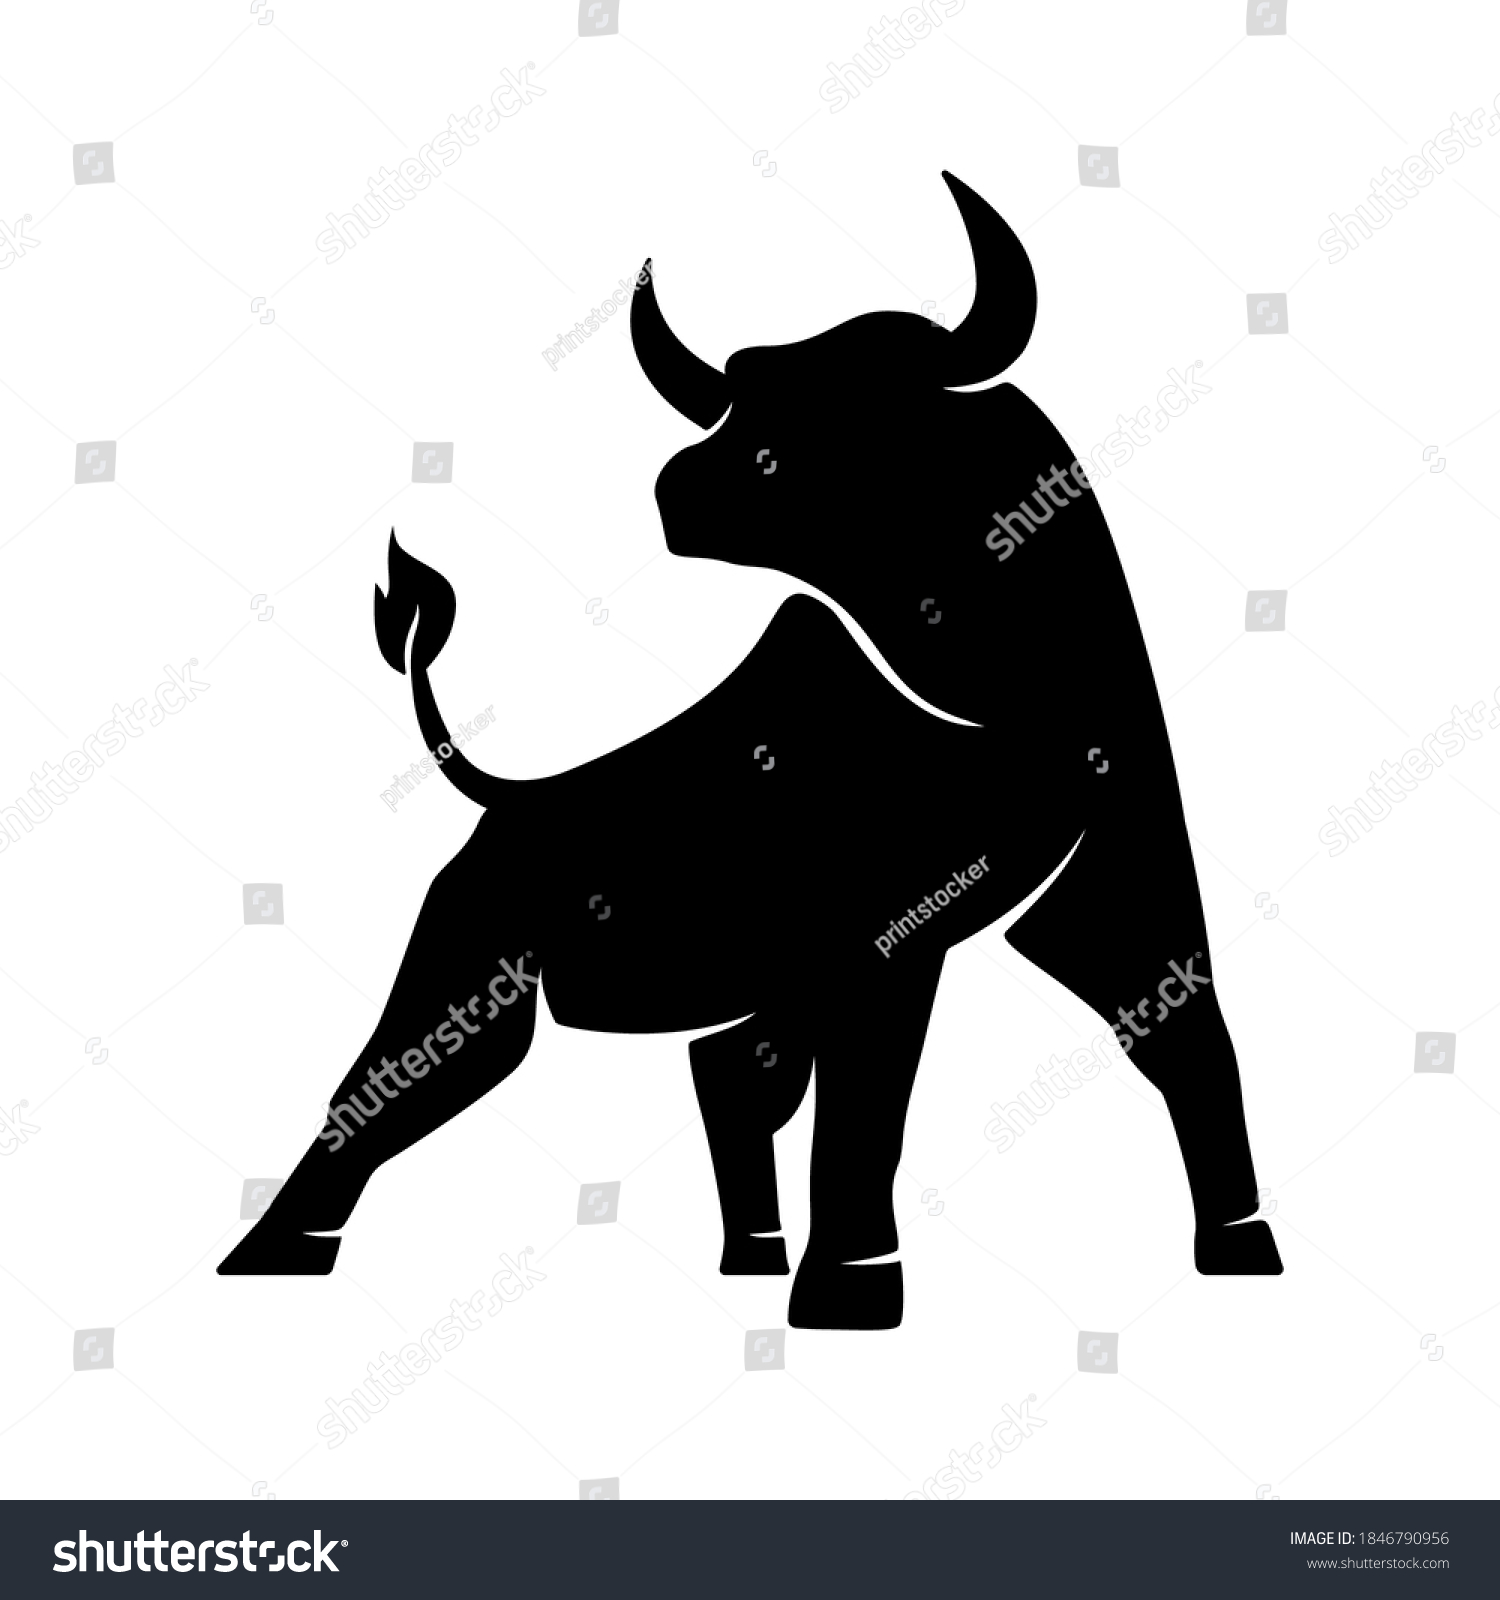 SVG of Bull silhouette , monochrome logo, symbol of the year in the Chinese zodiac calendar. Vector illustration of a standing horned ox or a black angus isolated on a white background svg